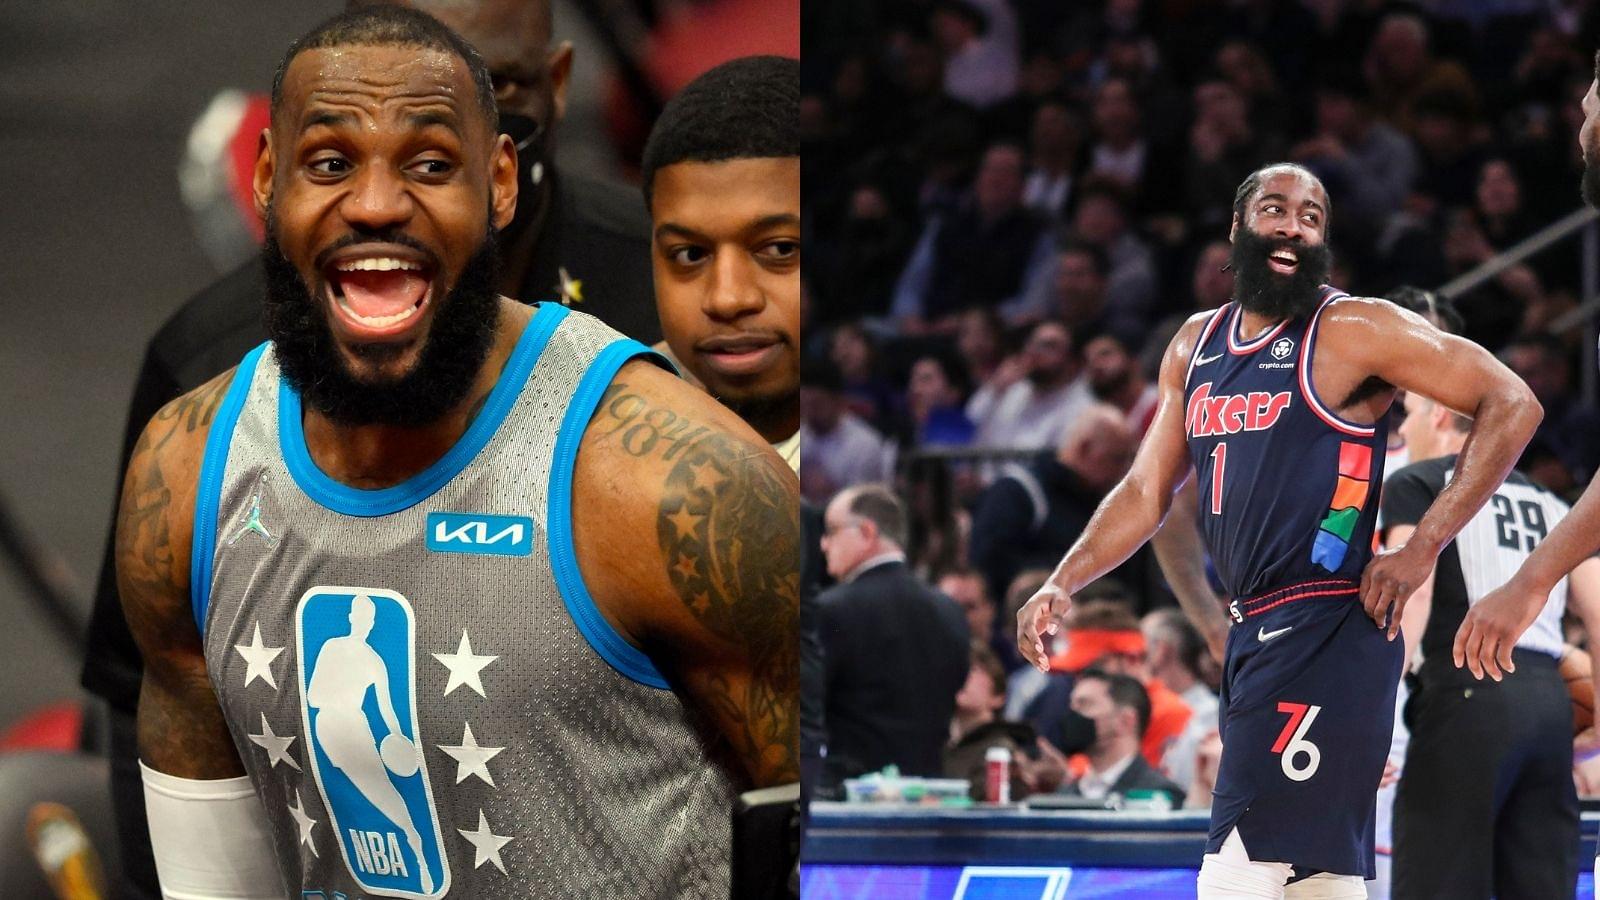 "James Harden, are you off the Lobos?": LeBron James hilariously calls out the 76ers guard for 'drunken' mishap on sidelines